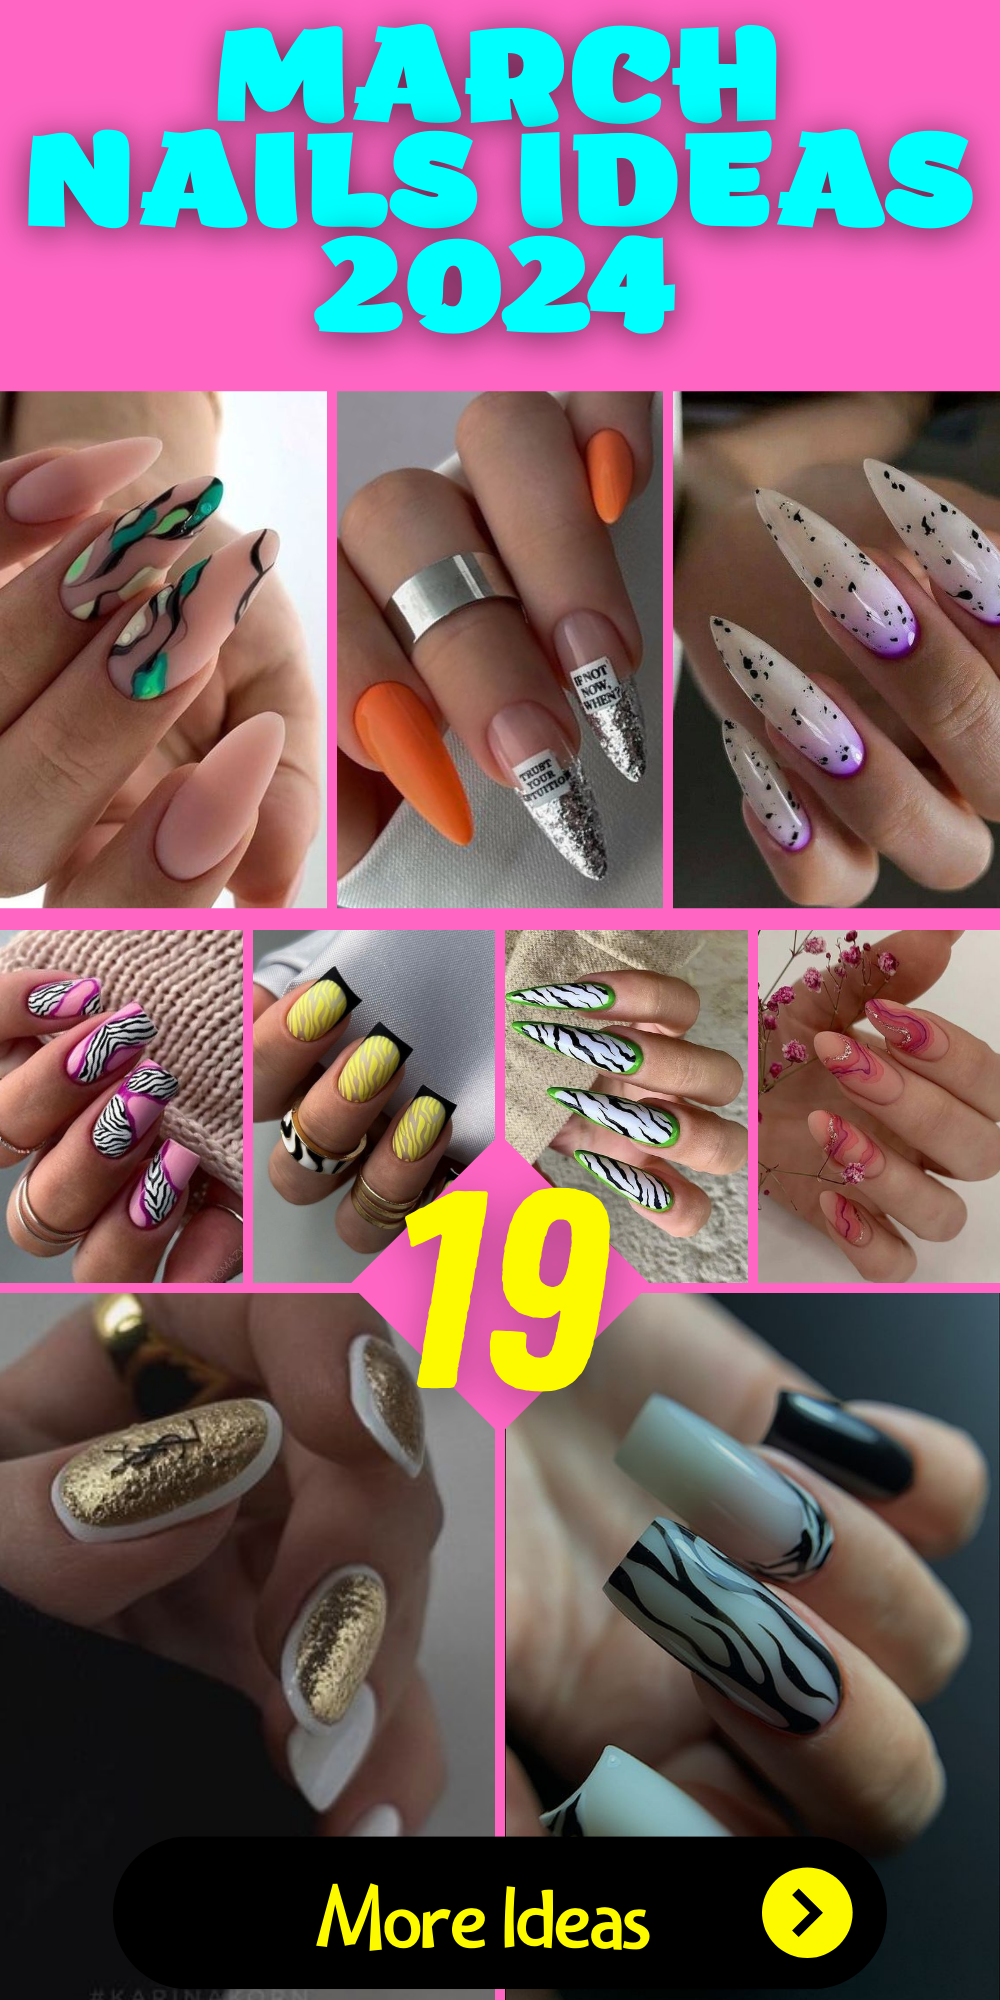 March 2024 Nail Trends: Cute & Trendy Manicure Ideas for Spring